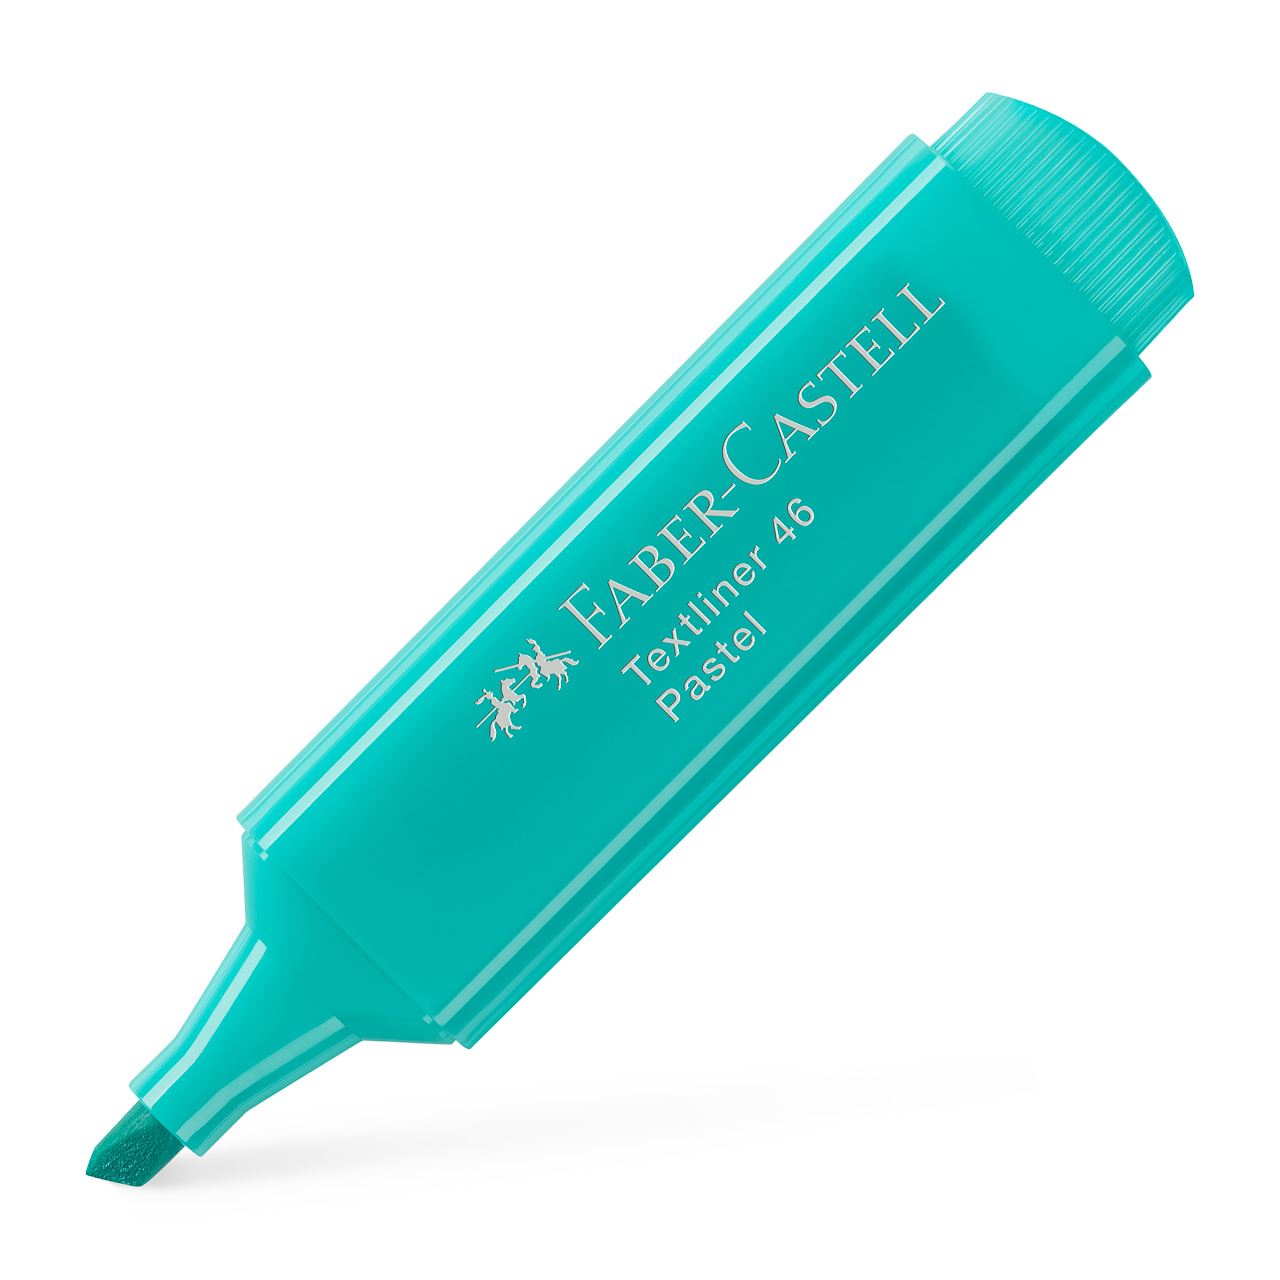 Faber-Castell - Textliner - Turquoise